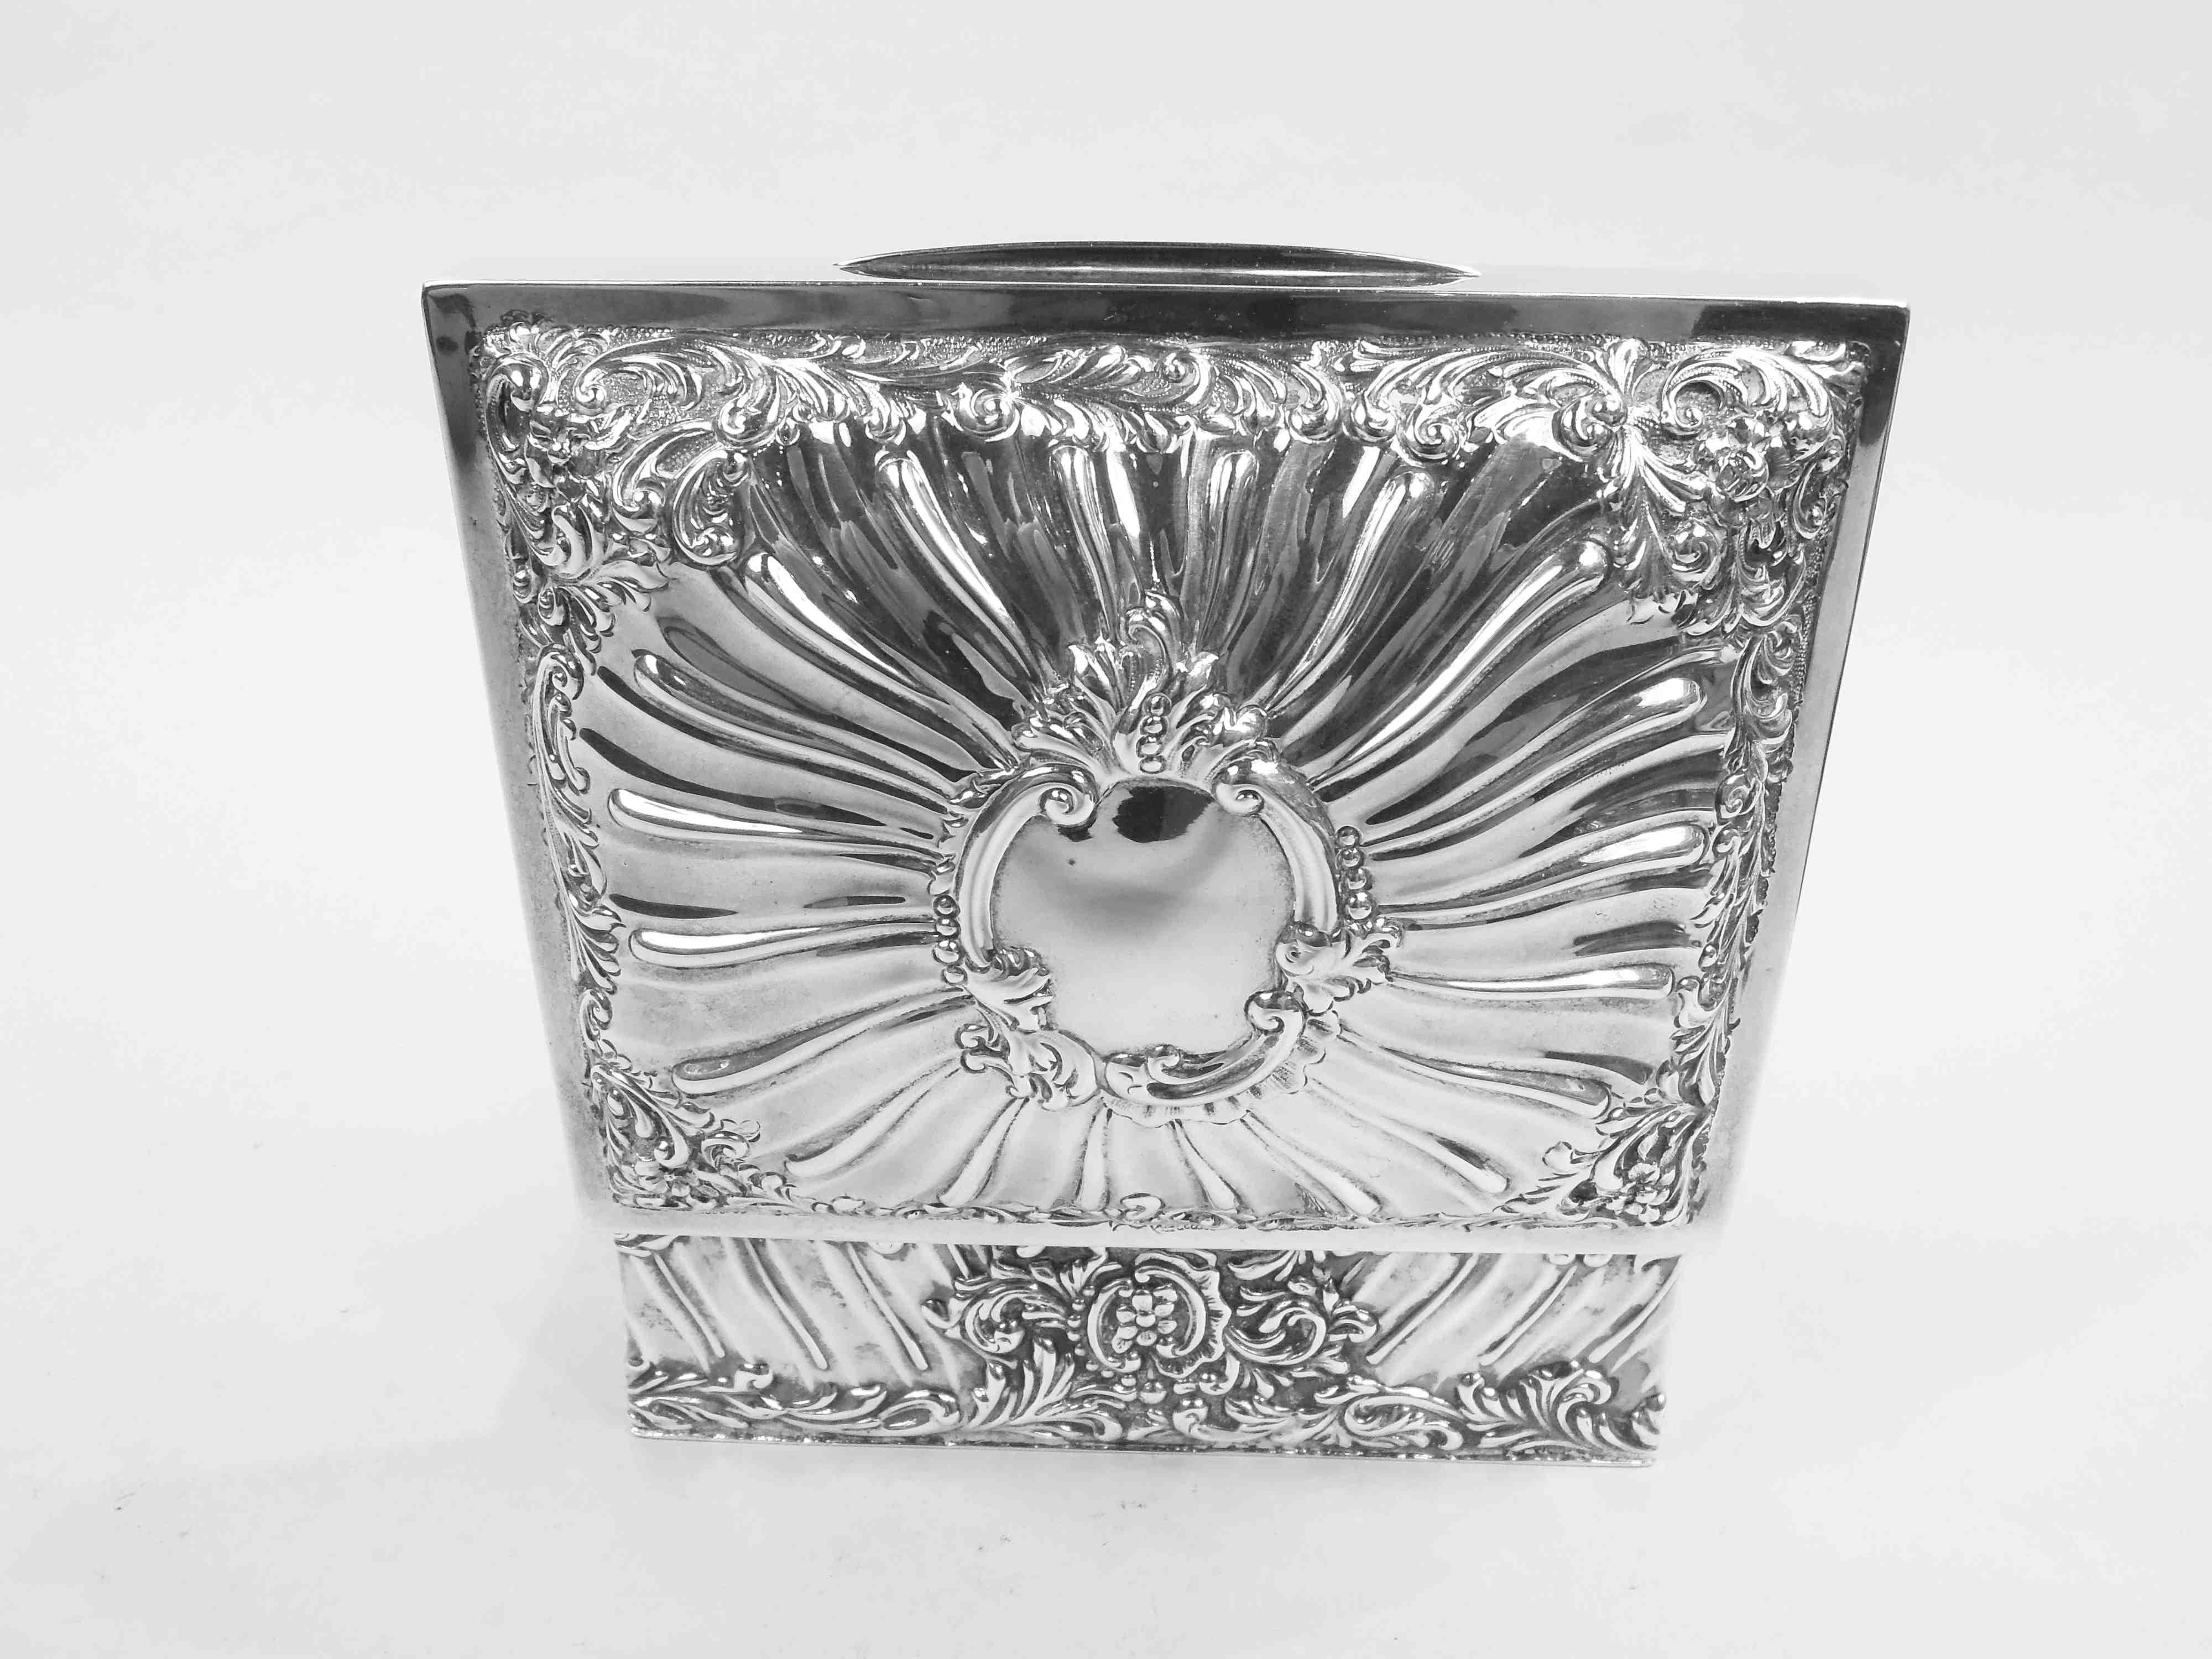 Antique English Edwardian Classical Sterling Silver Jewelry Box, 1904 2